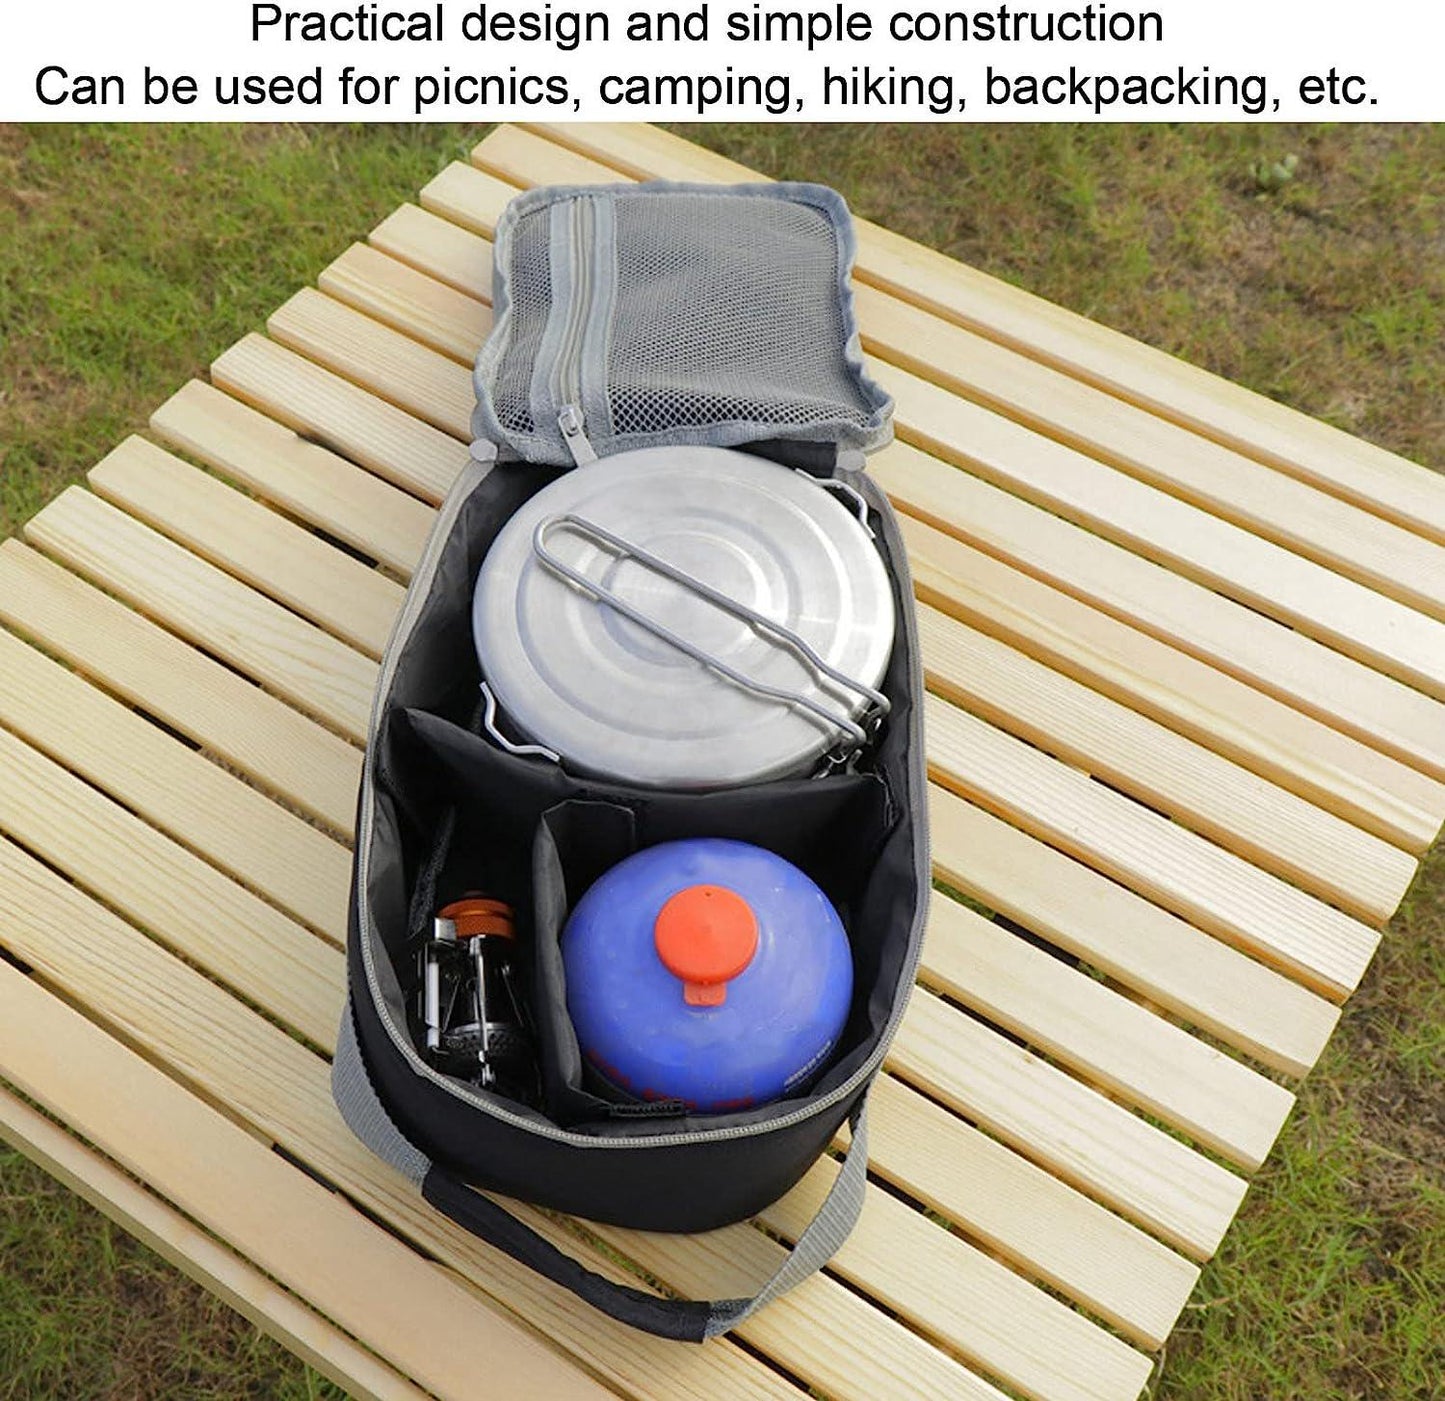 FIYO Camping Tableware Storage Bag, Picnic Tourist Tableware Set Storage Container Large Capacity Detachable Compartment Cooking Utensils Organizer